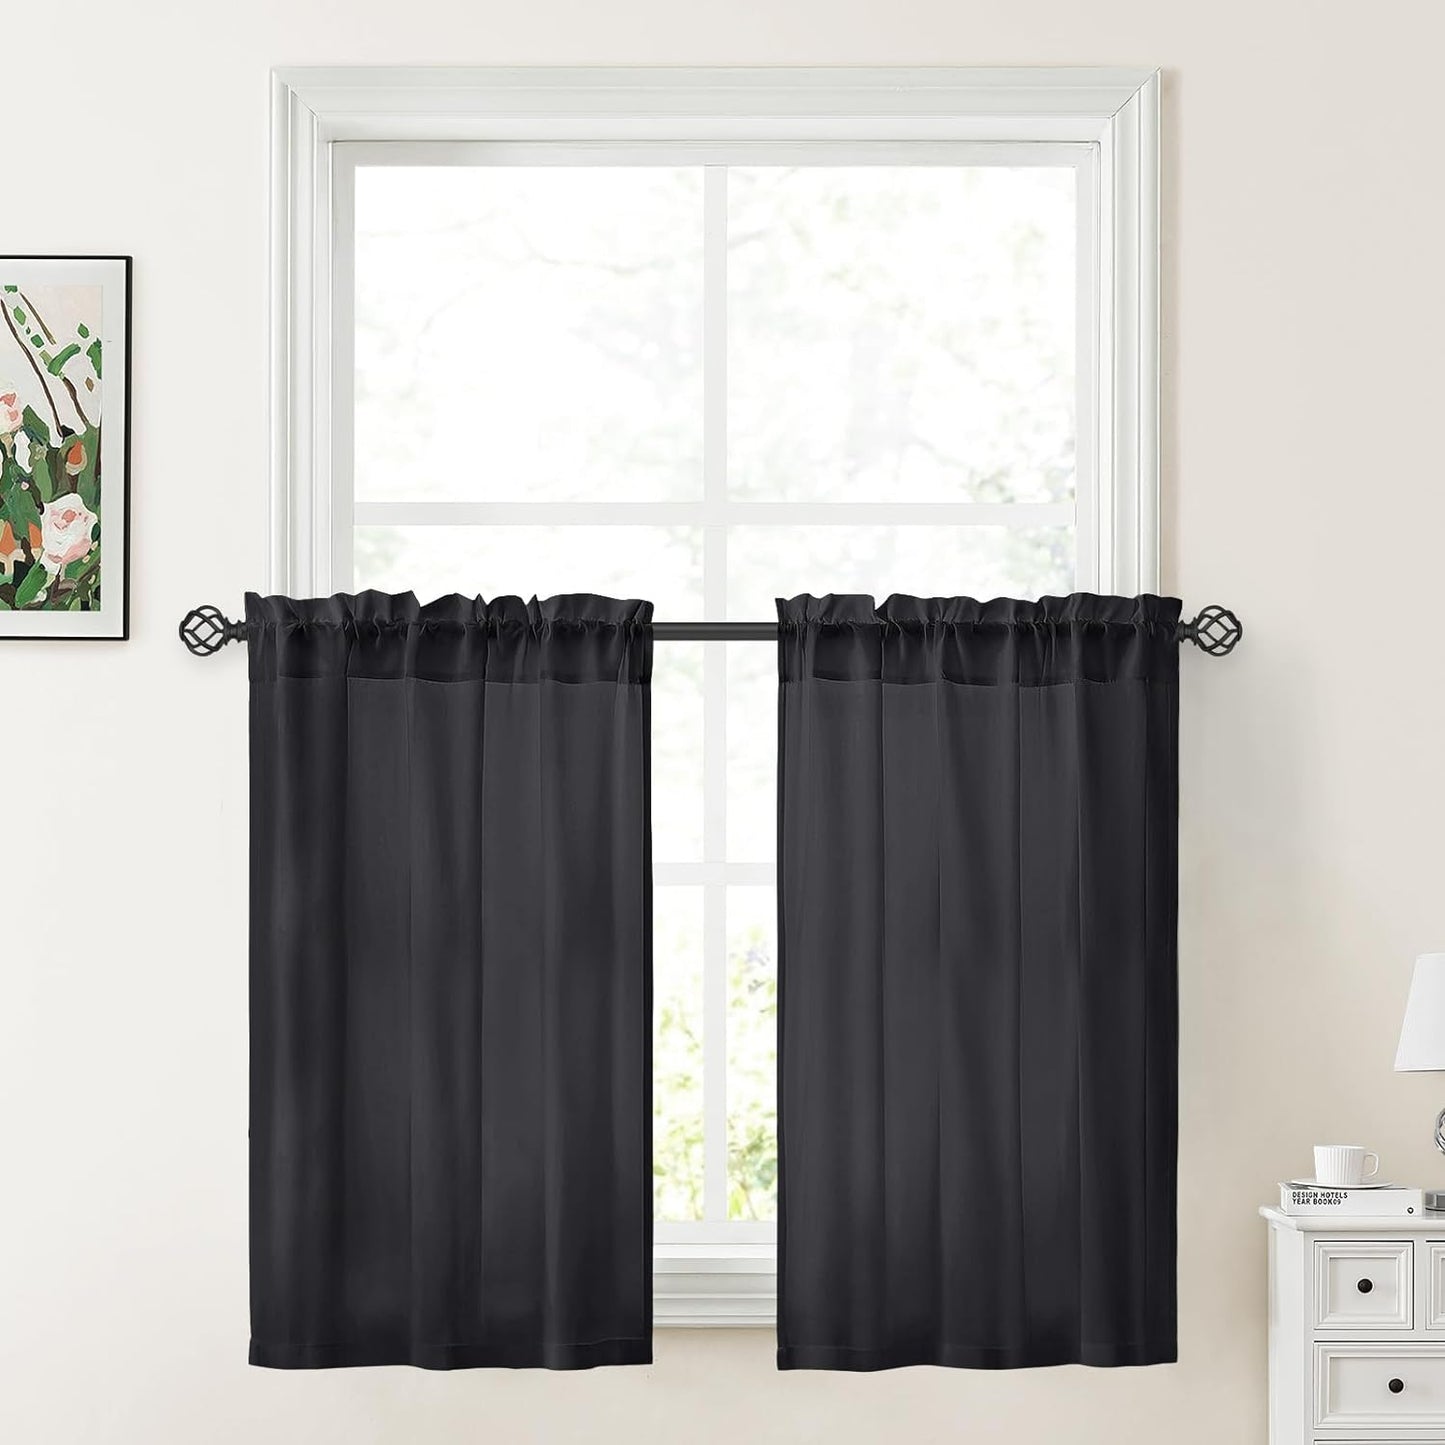 HOMEIDEAS Non-See-Through White Privacy Sheer Curtains 52 X 84 Inches Long 2 Panels Semi Sheer Curtains Light Filtering Window Curtains Drapes for Bedroom Living Room  HOMEIDEAS Black W30" X L36" 